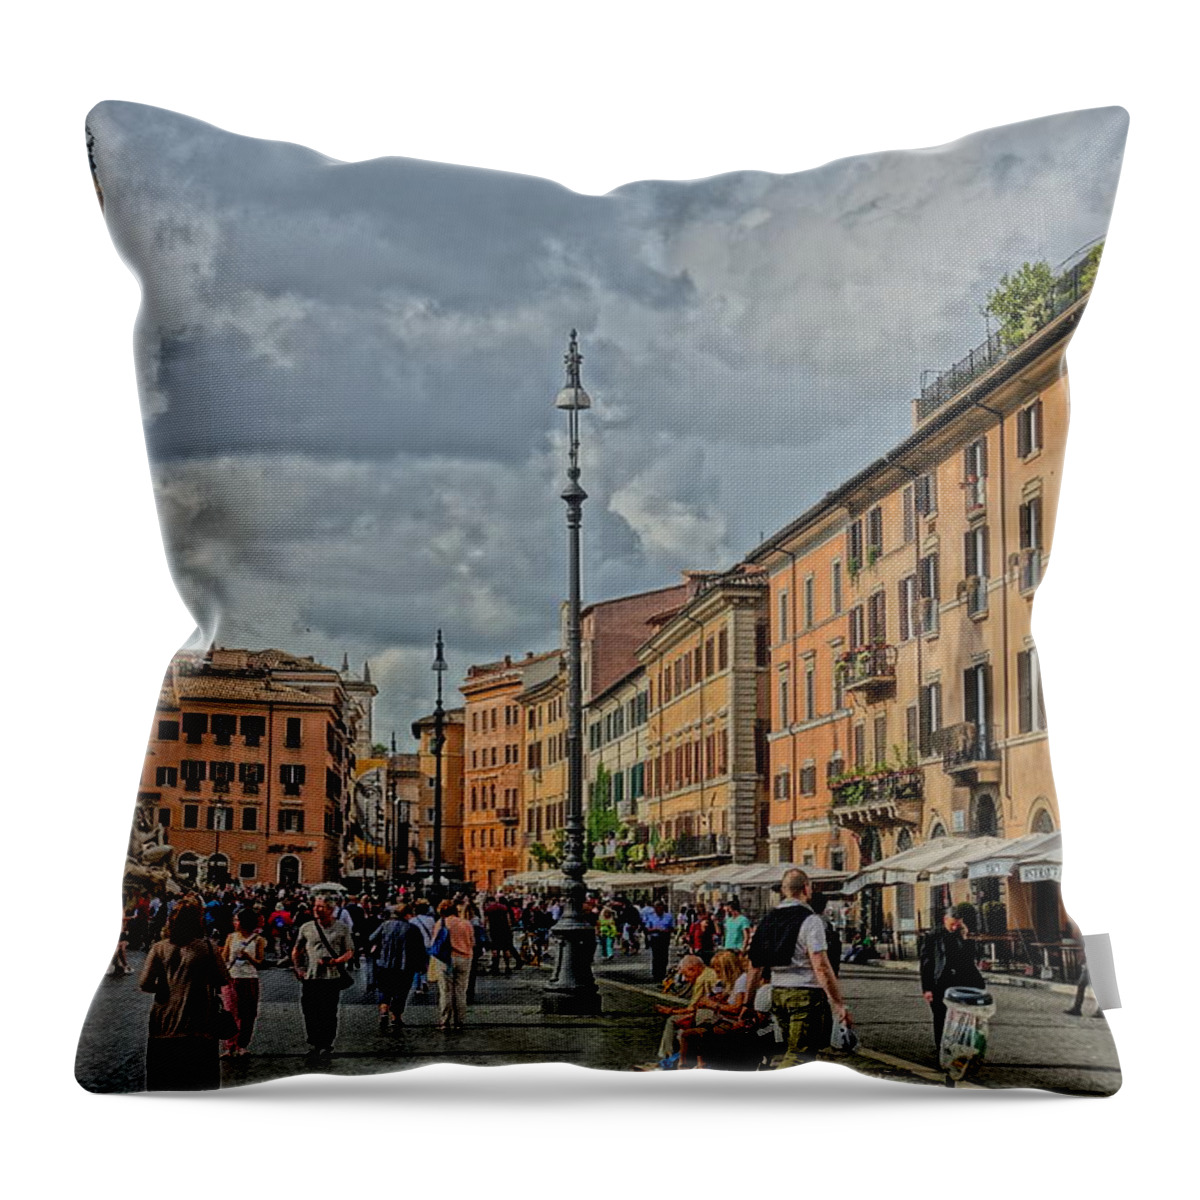 Fountain Throw Pillow featuring the photograph A Busy Piazza Navona by Patricia Caron